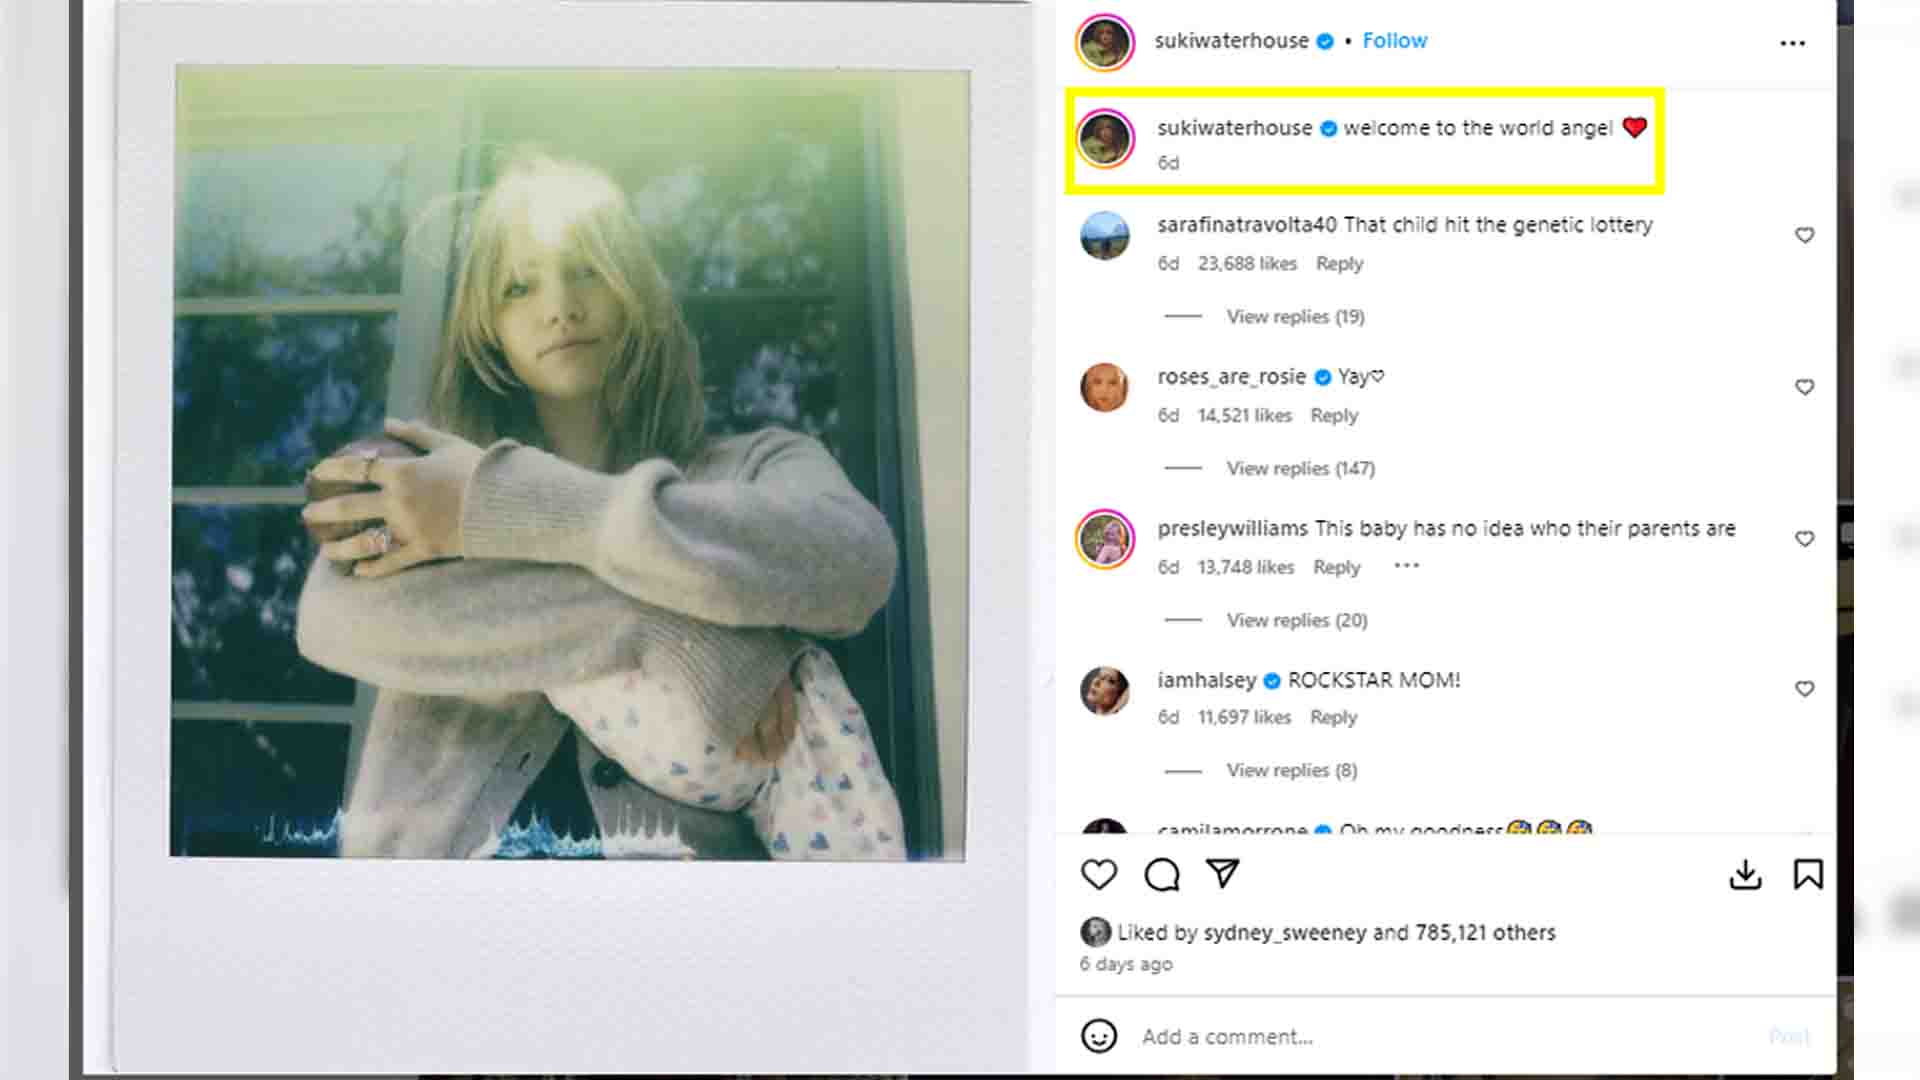 “Welcome to the World” Says Suki Waterhouse With the Post of Her Baby!